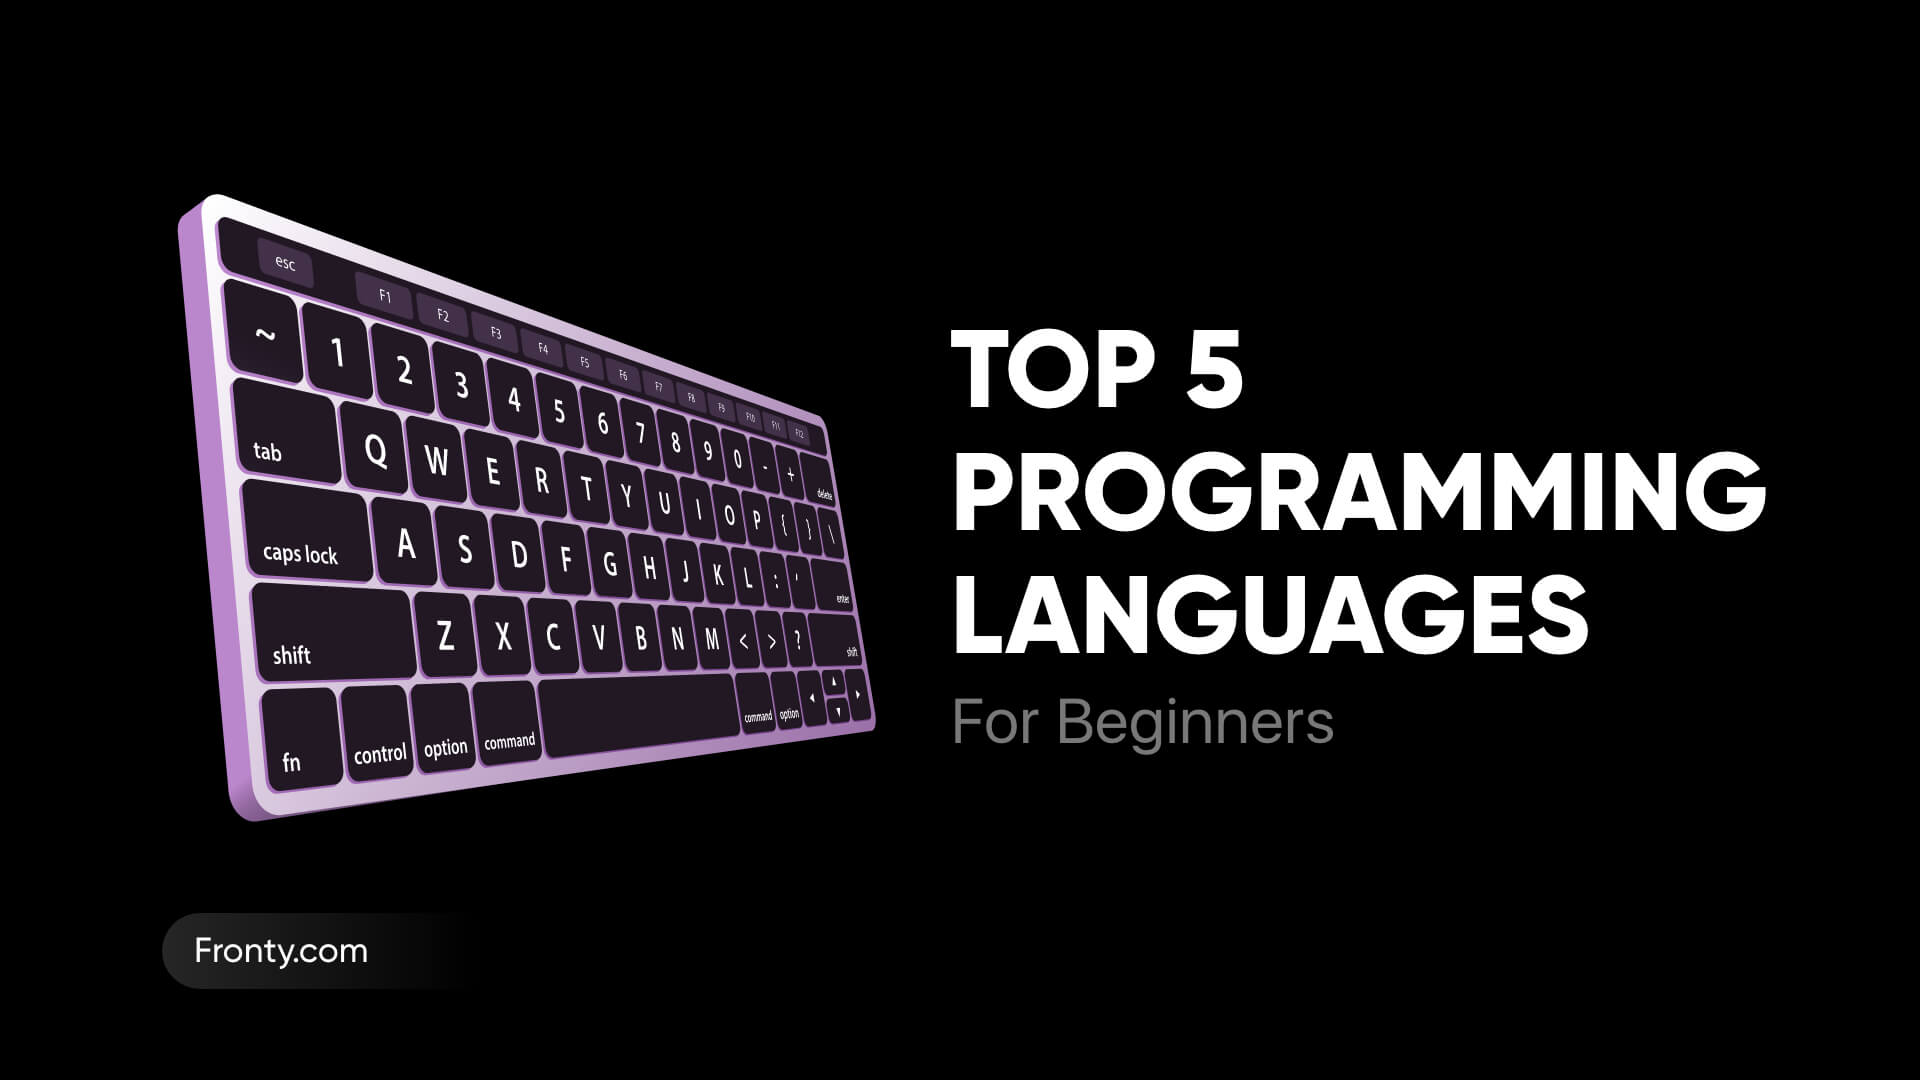 Top 5 Programming Languages for Beginners Fronty